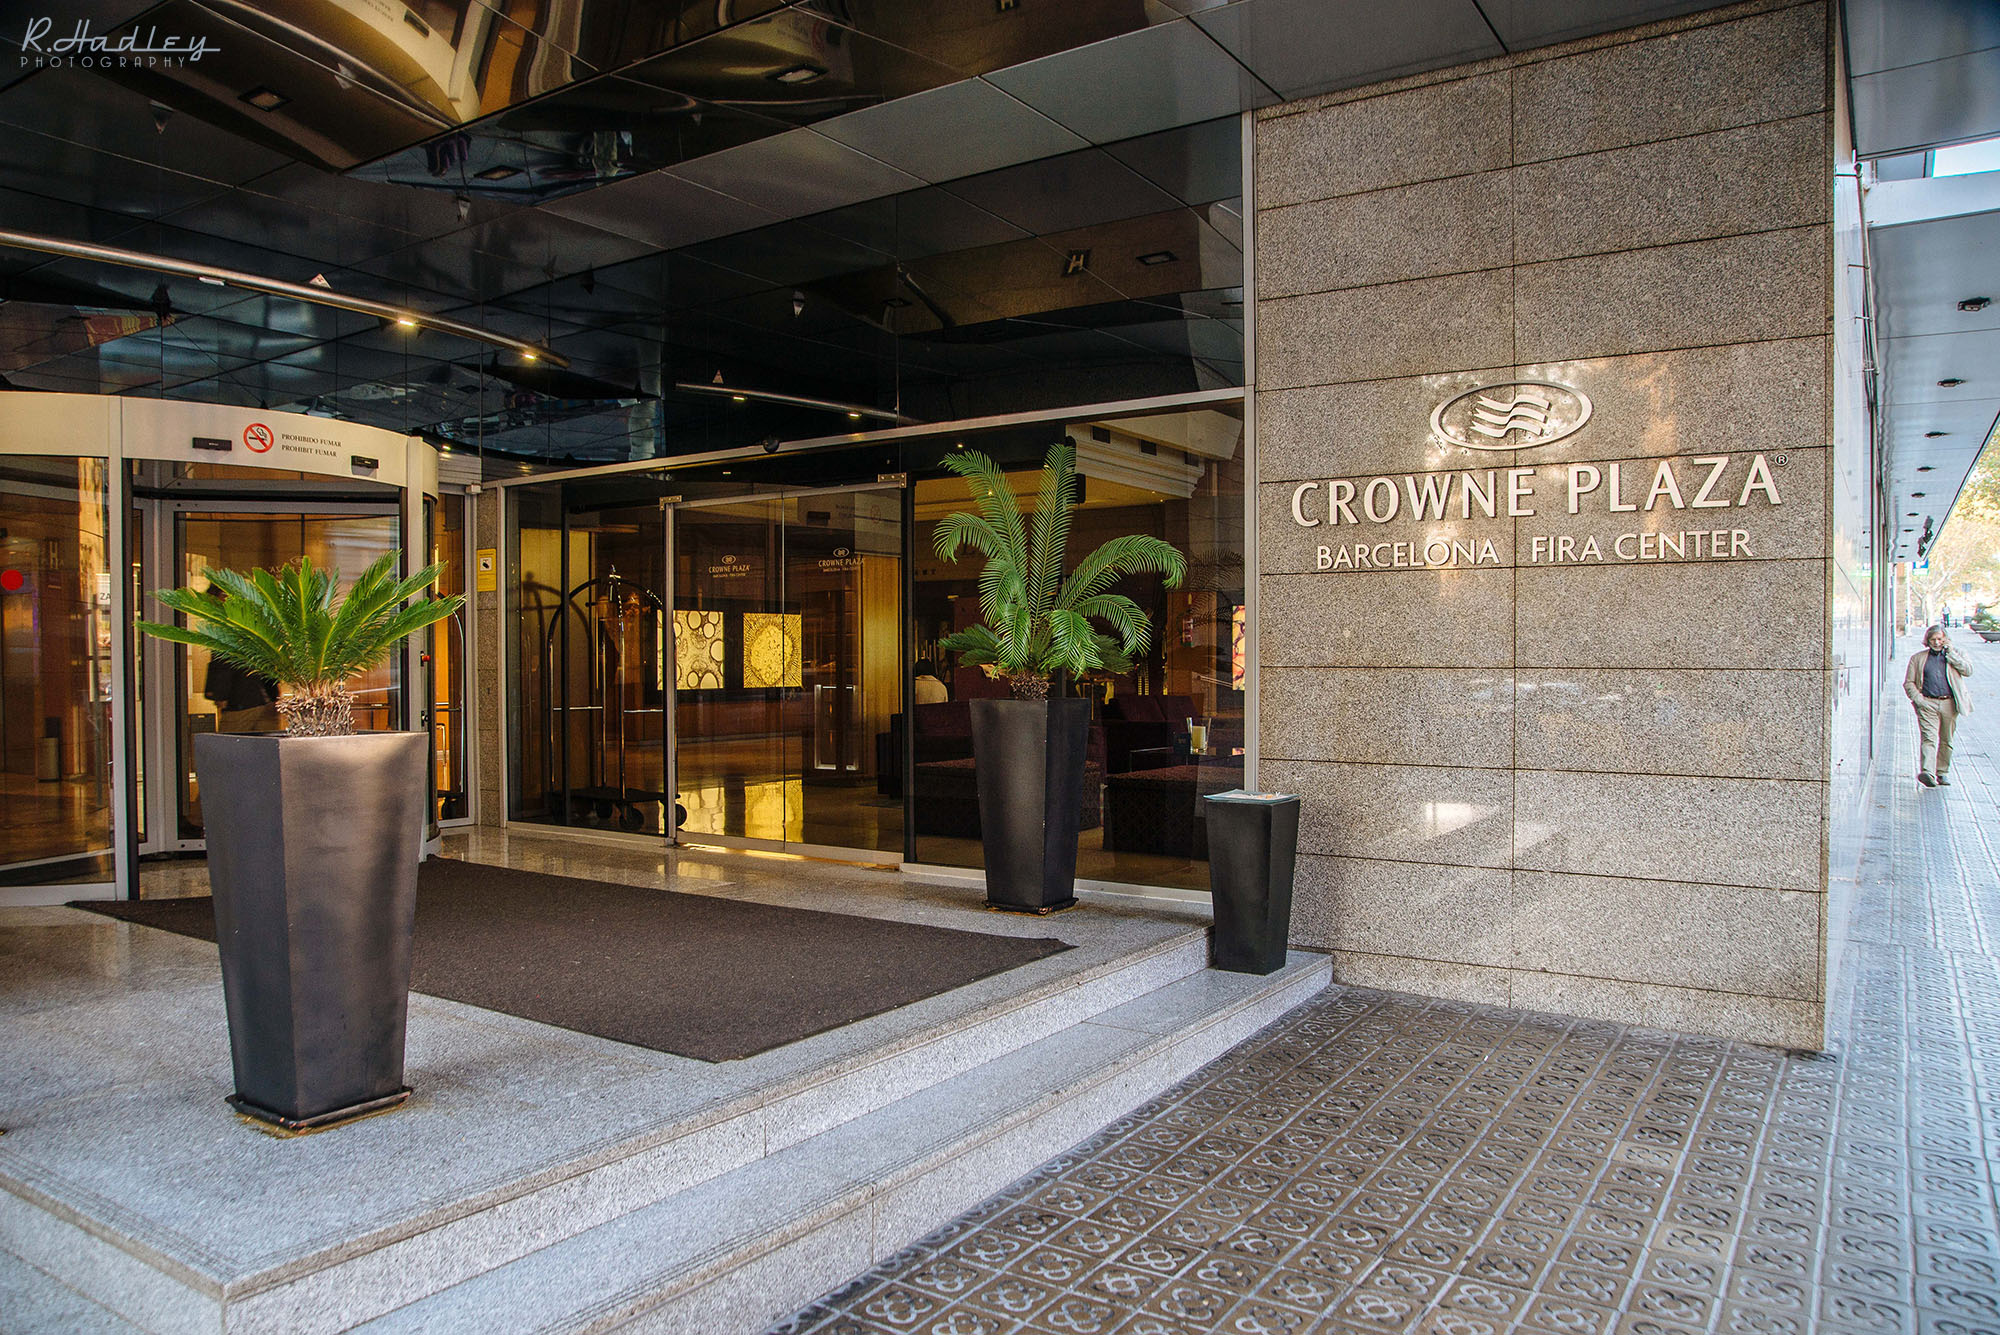 Corporate event photography at the Crowne Plaza in Barcelona